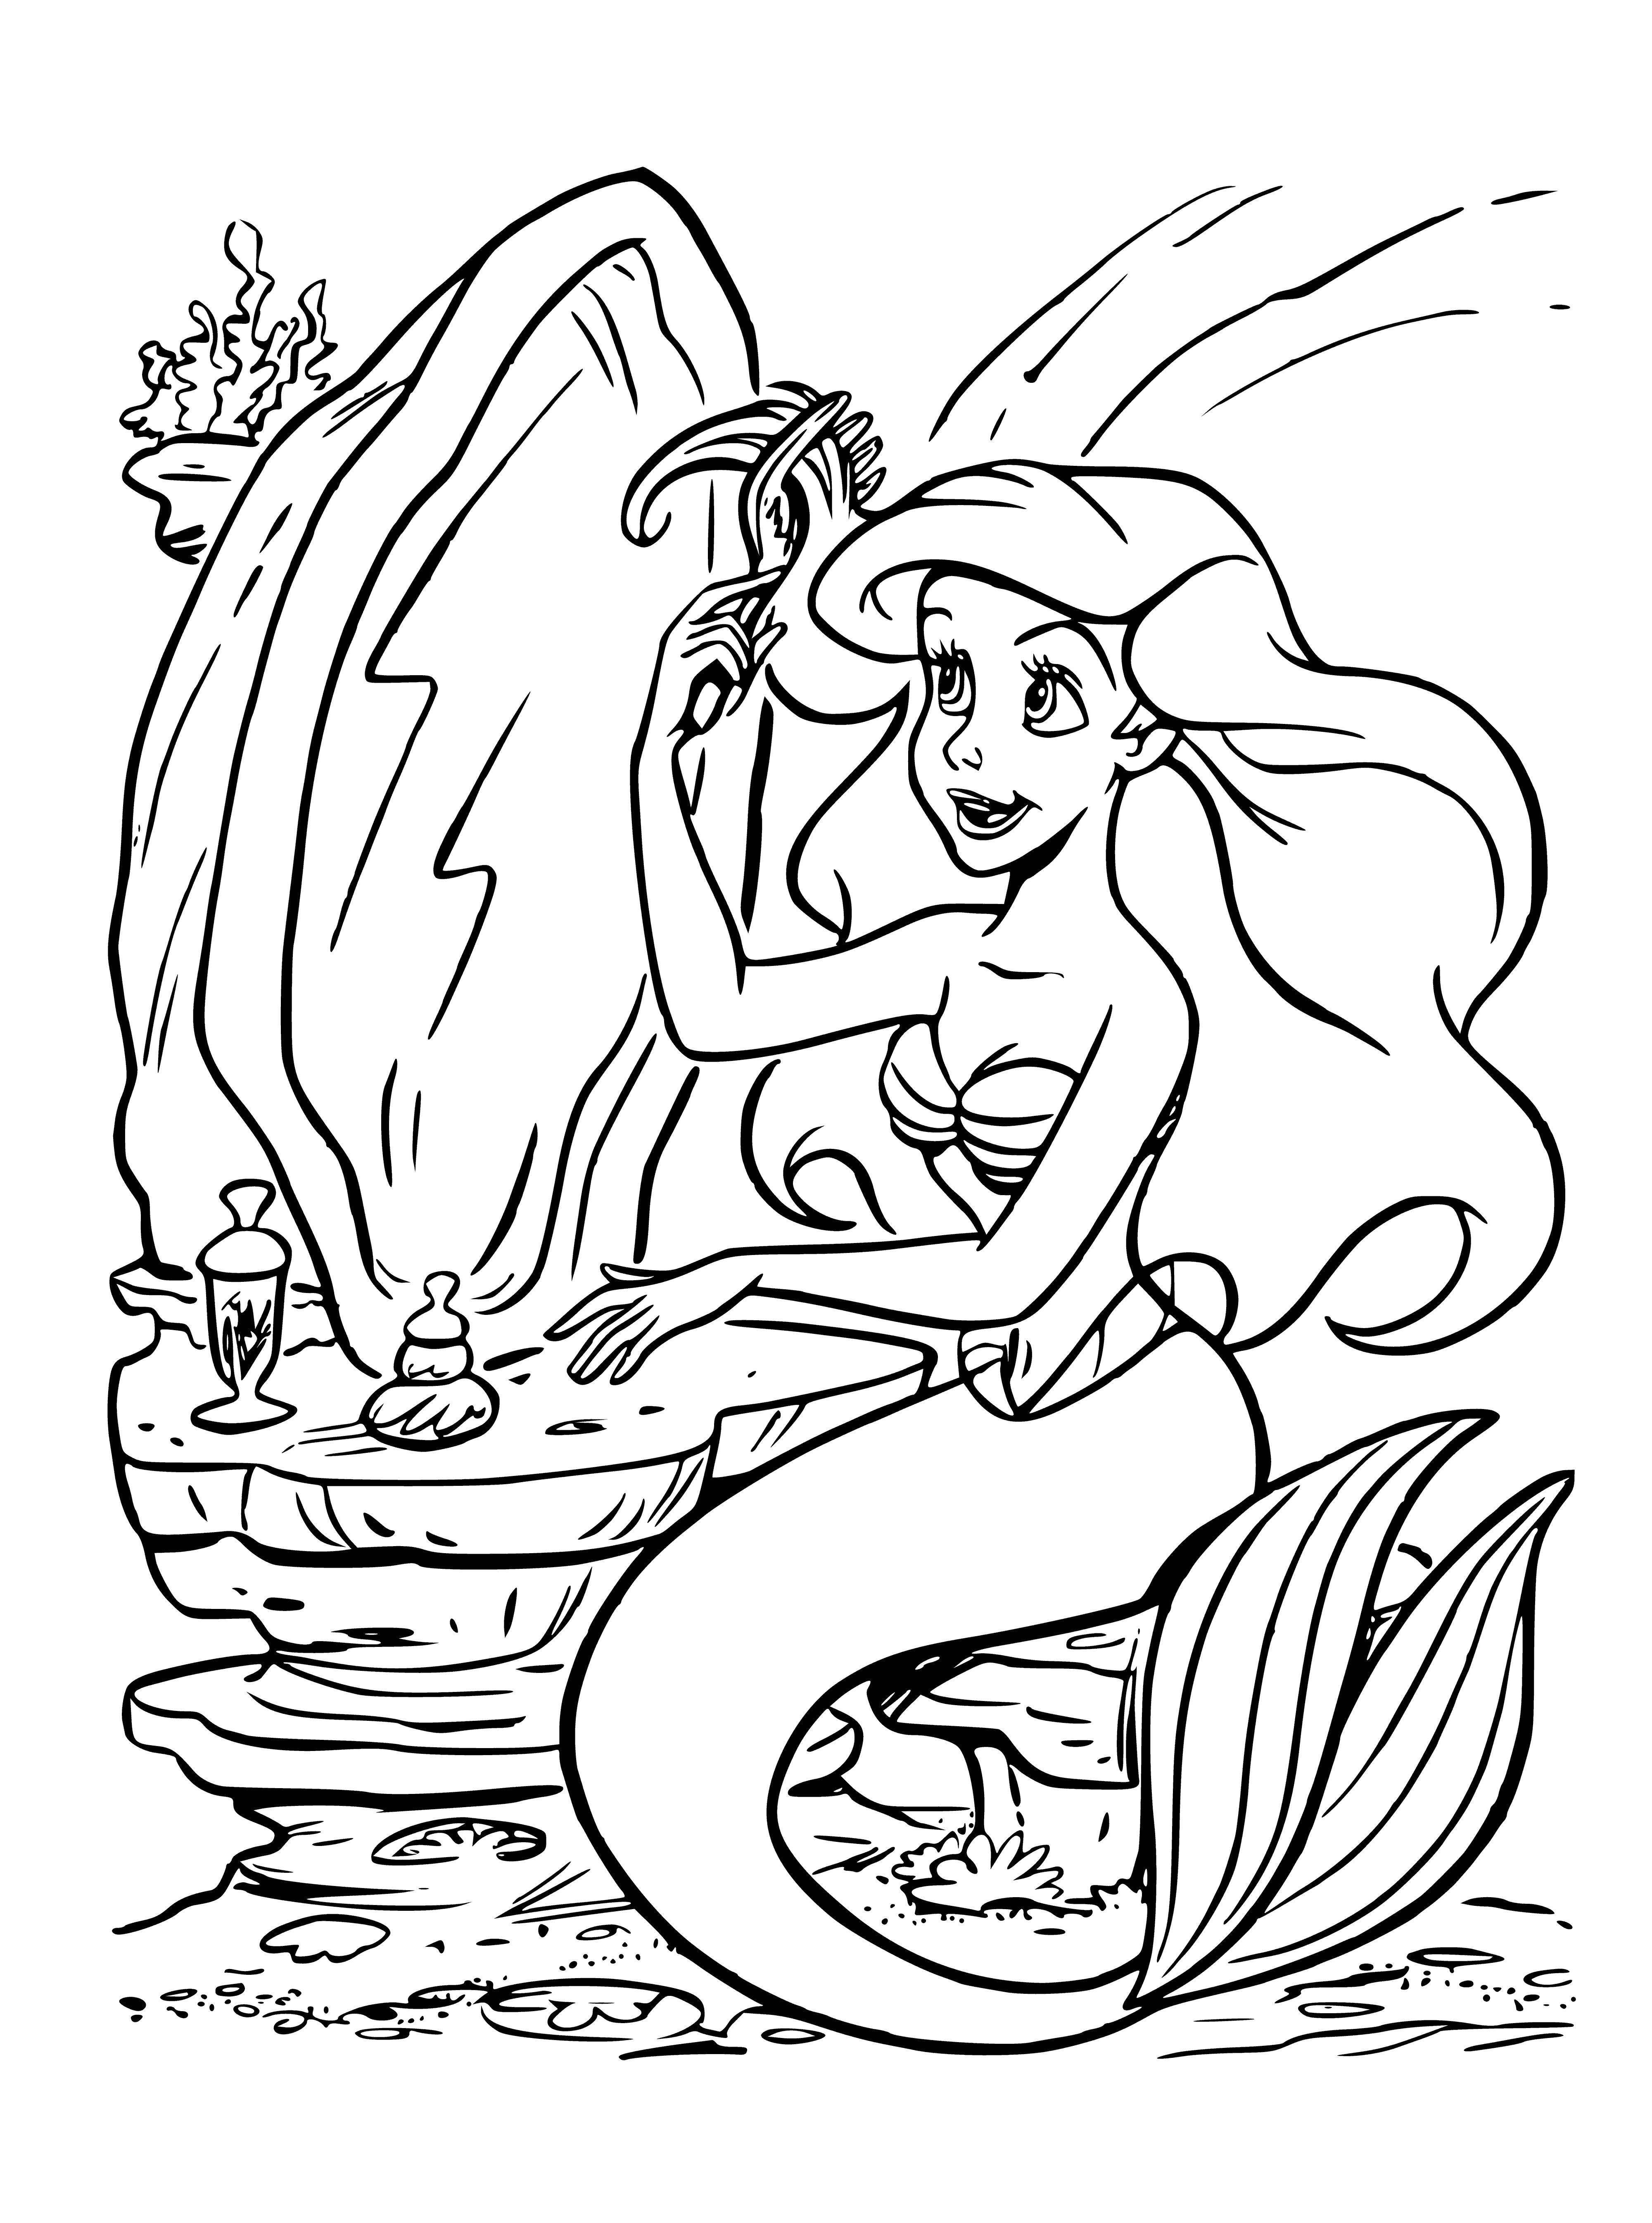 Comb-fork coloring page